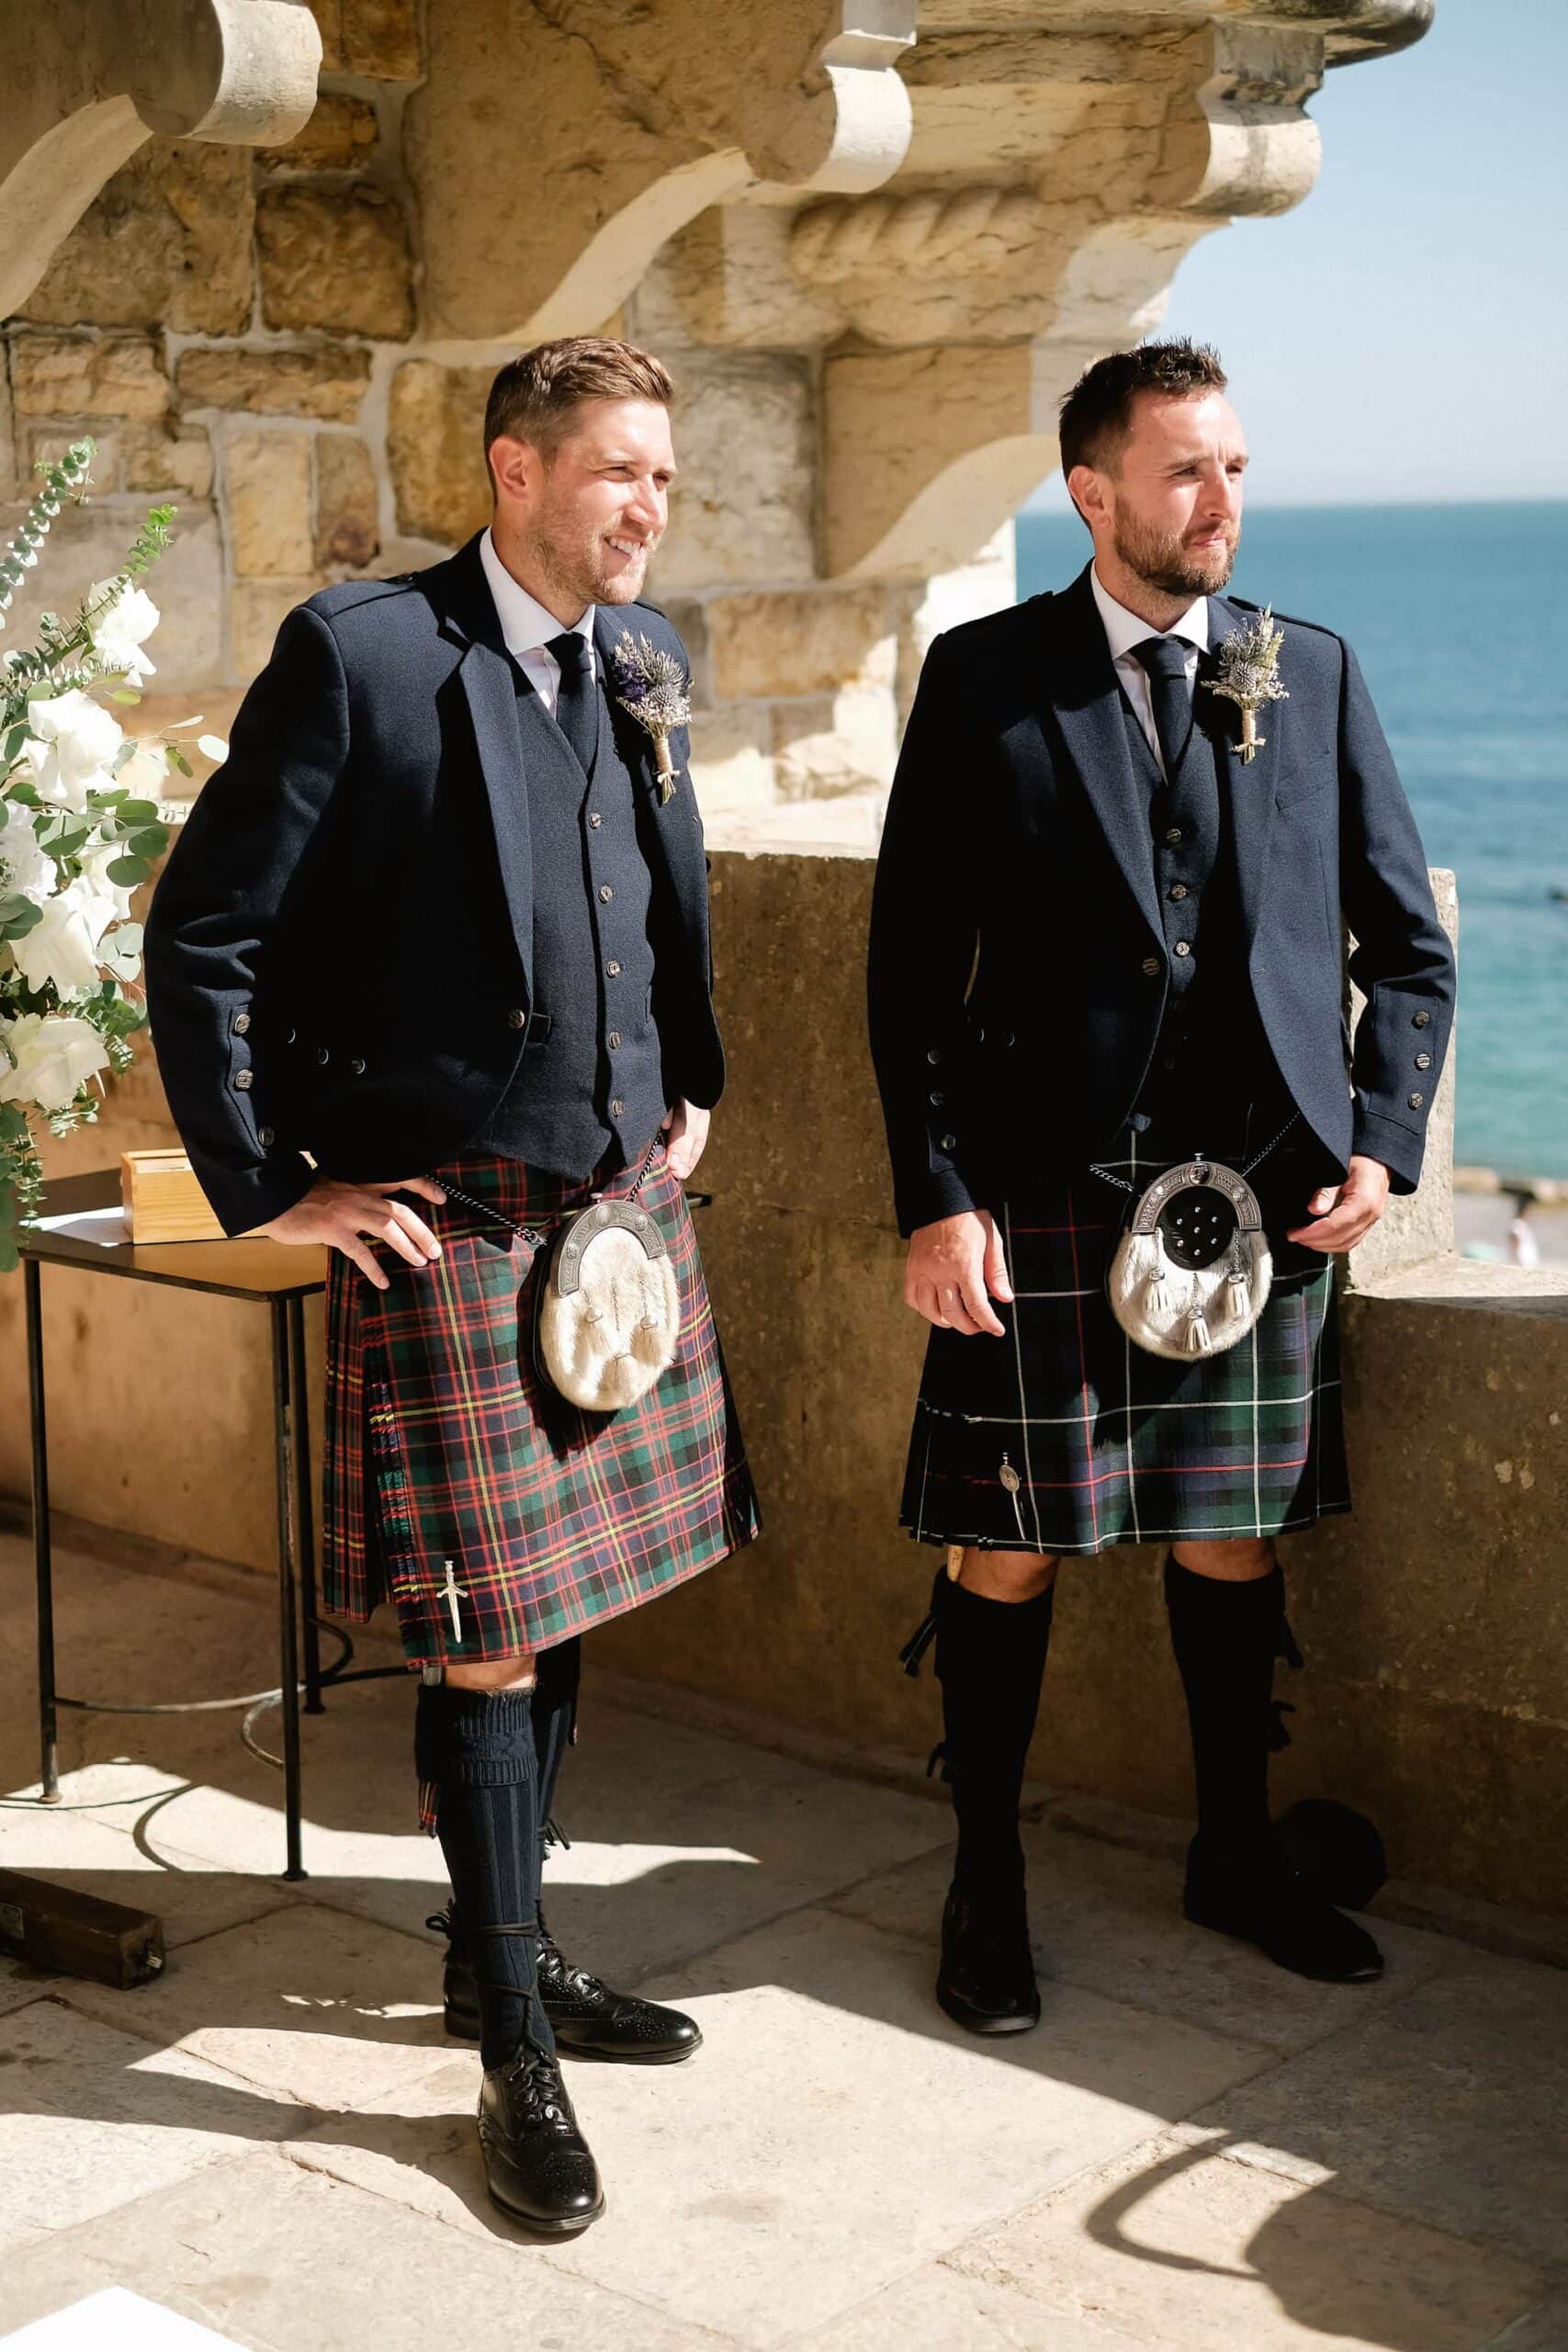 Scottish groom with scottish bestman waiting for the bride